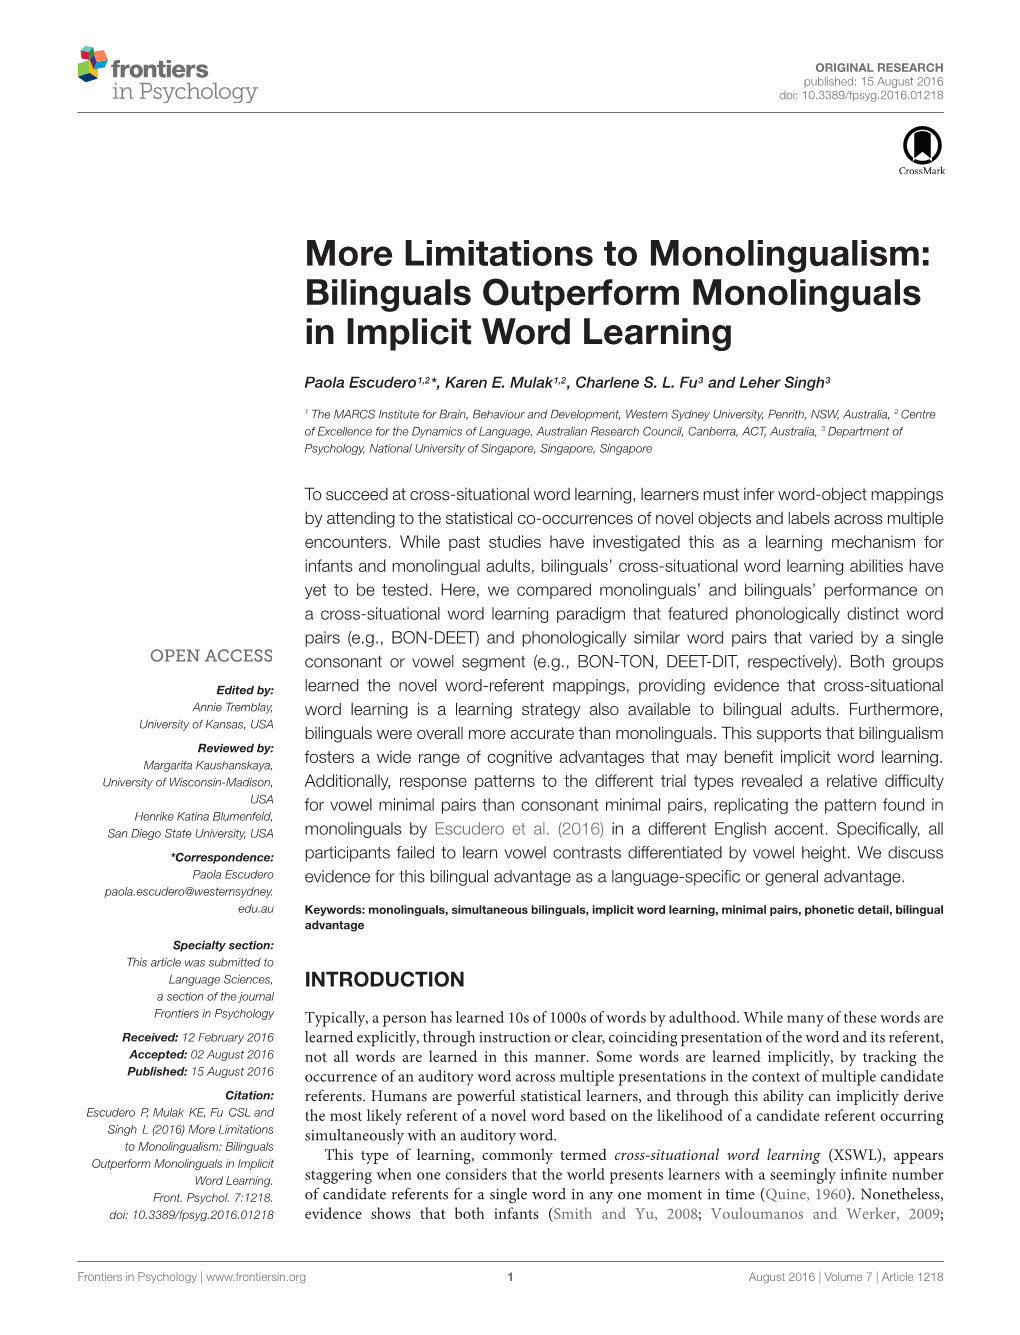 Bilinguals Outperform Monolinguals in Implicit Word Learning